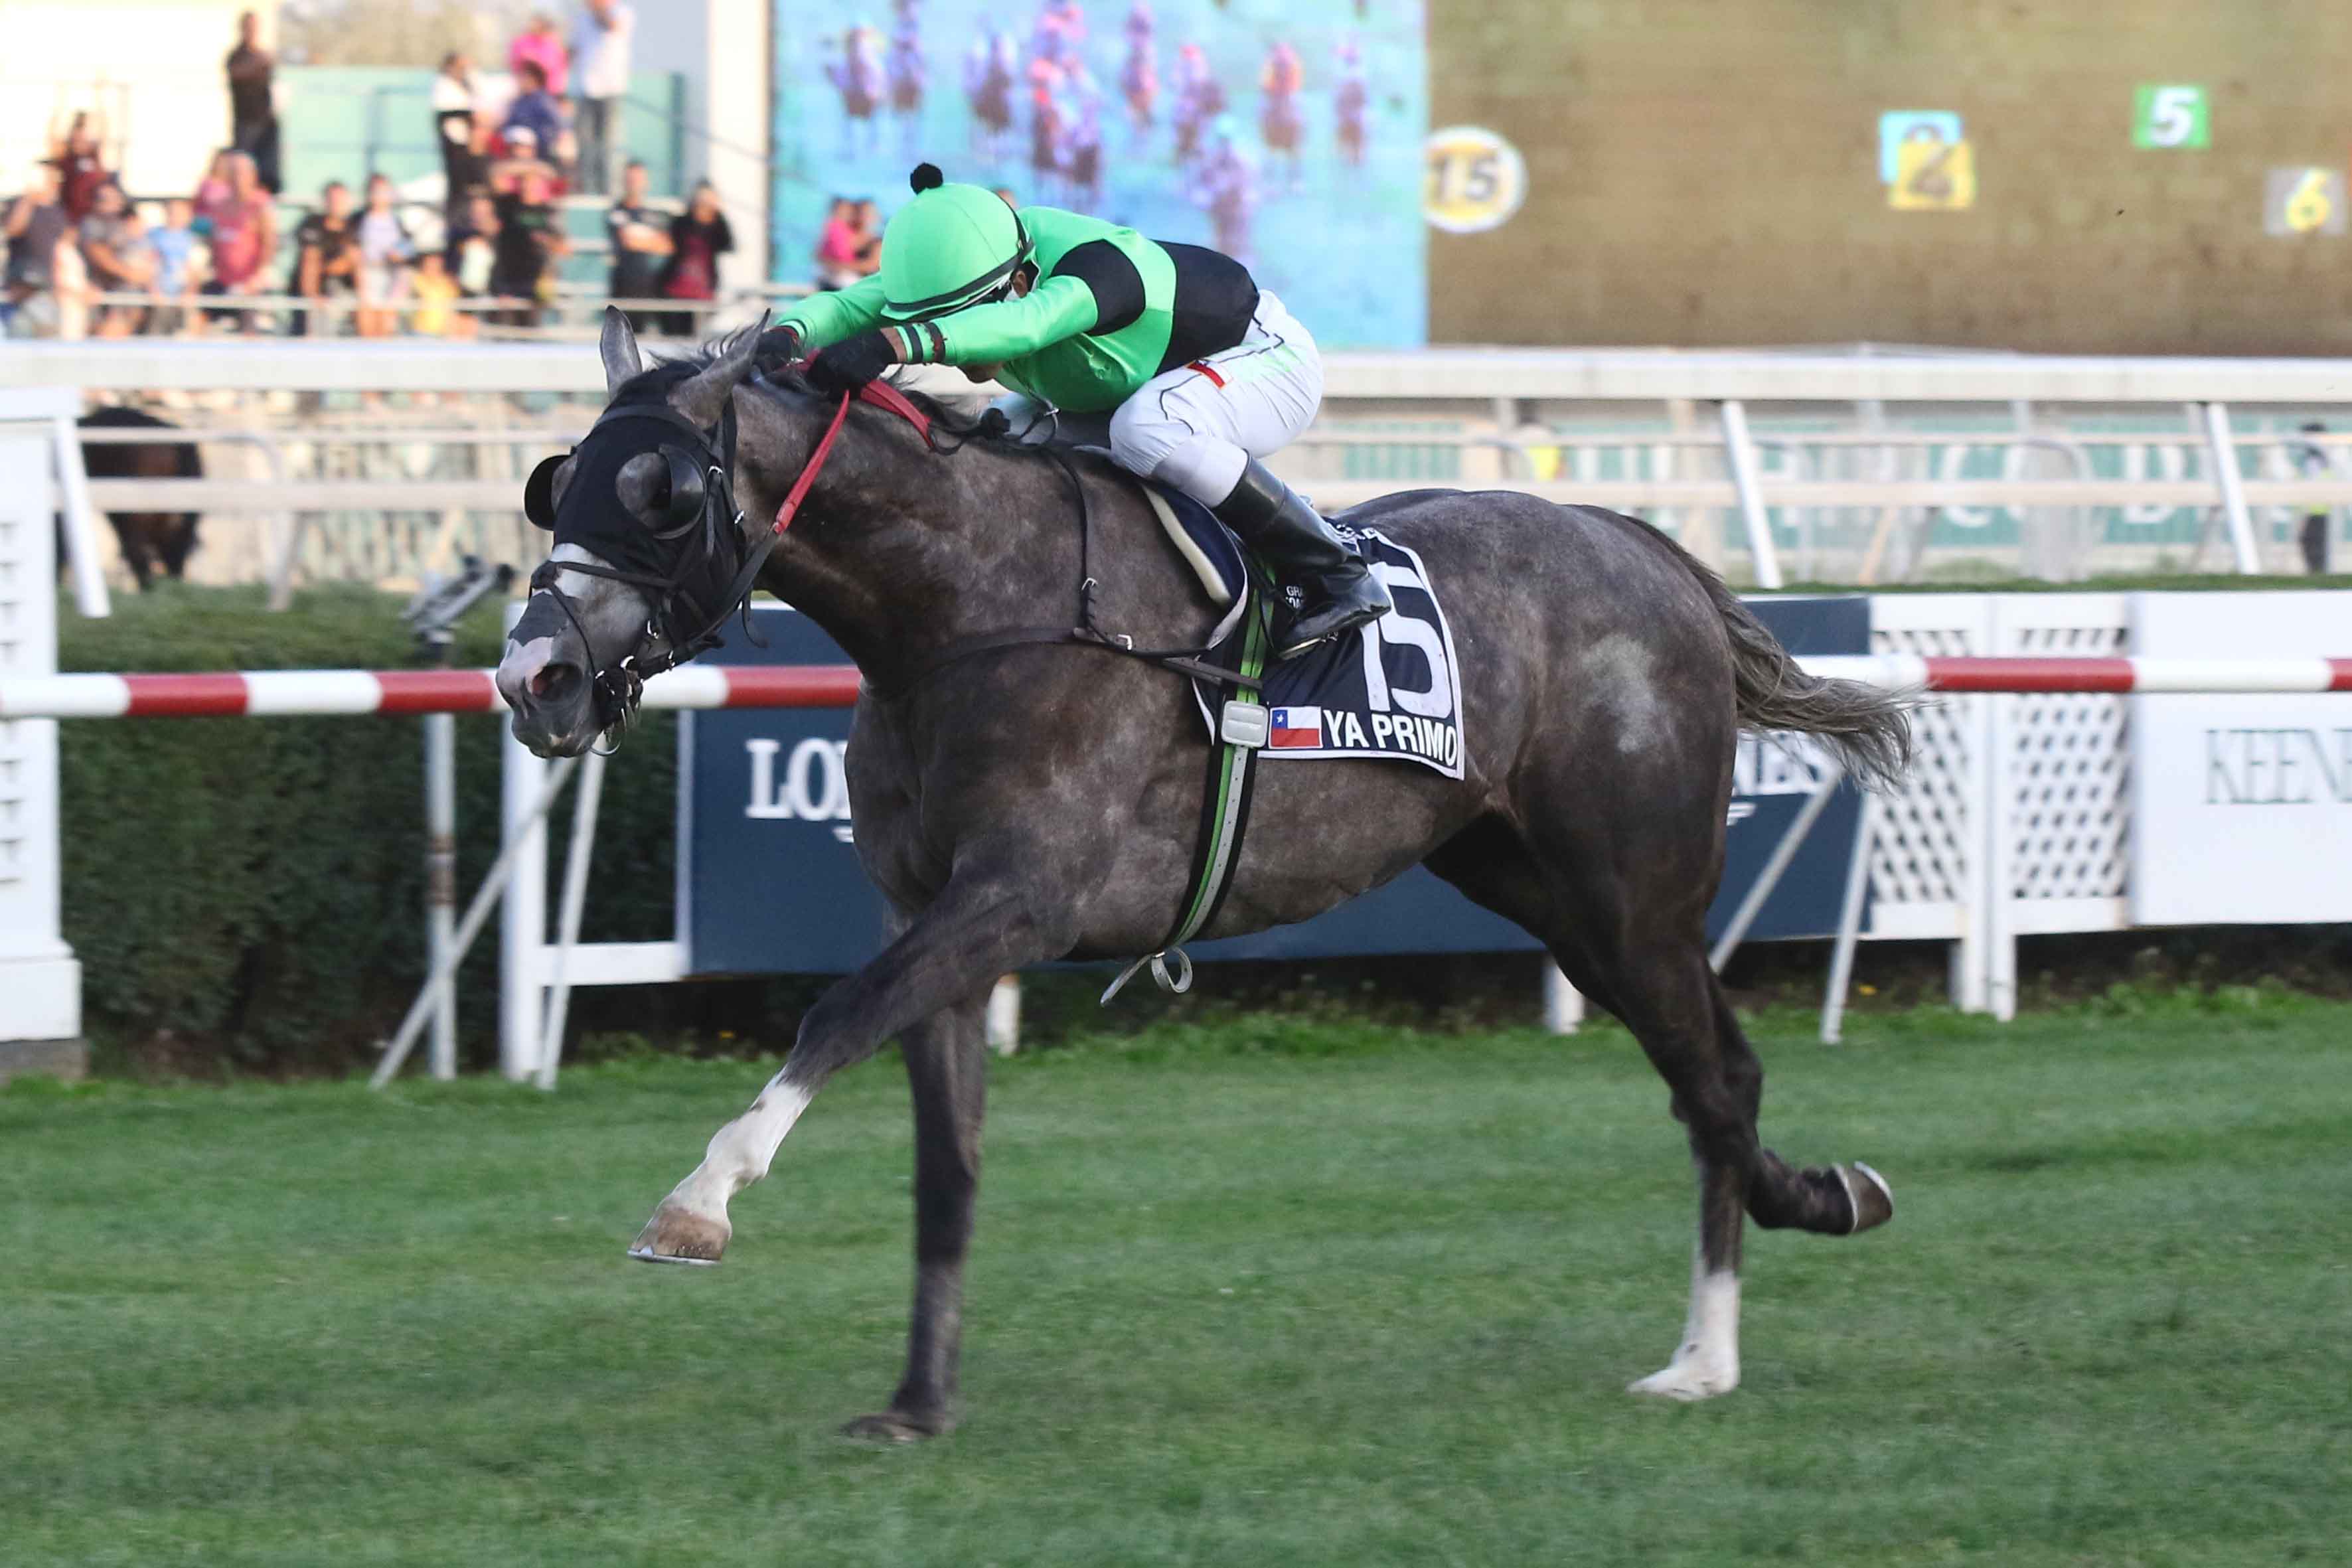 Ya Primo winning at Club Hipico in Santiago on Sunday. “I think he’s very good … The sky’s the limit,” says Javier Carvallo, vice chairman of the racecourse and a partner in Ya Primo. Photo: Club Hipico